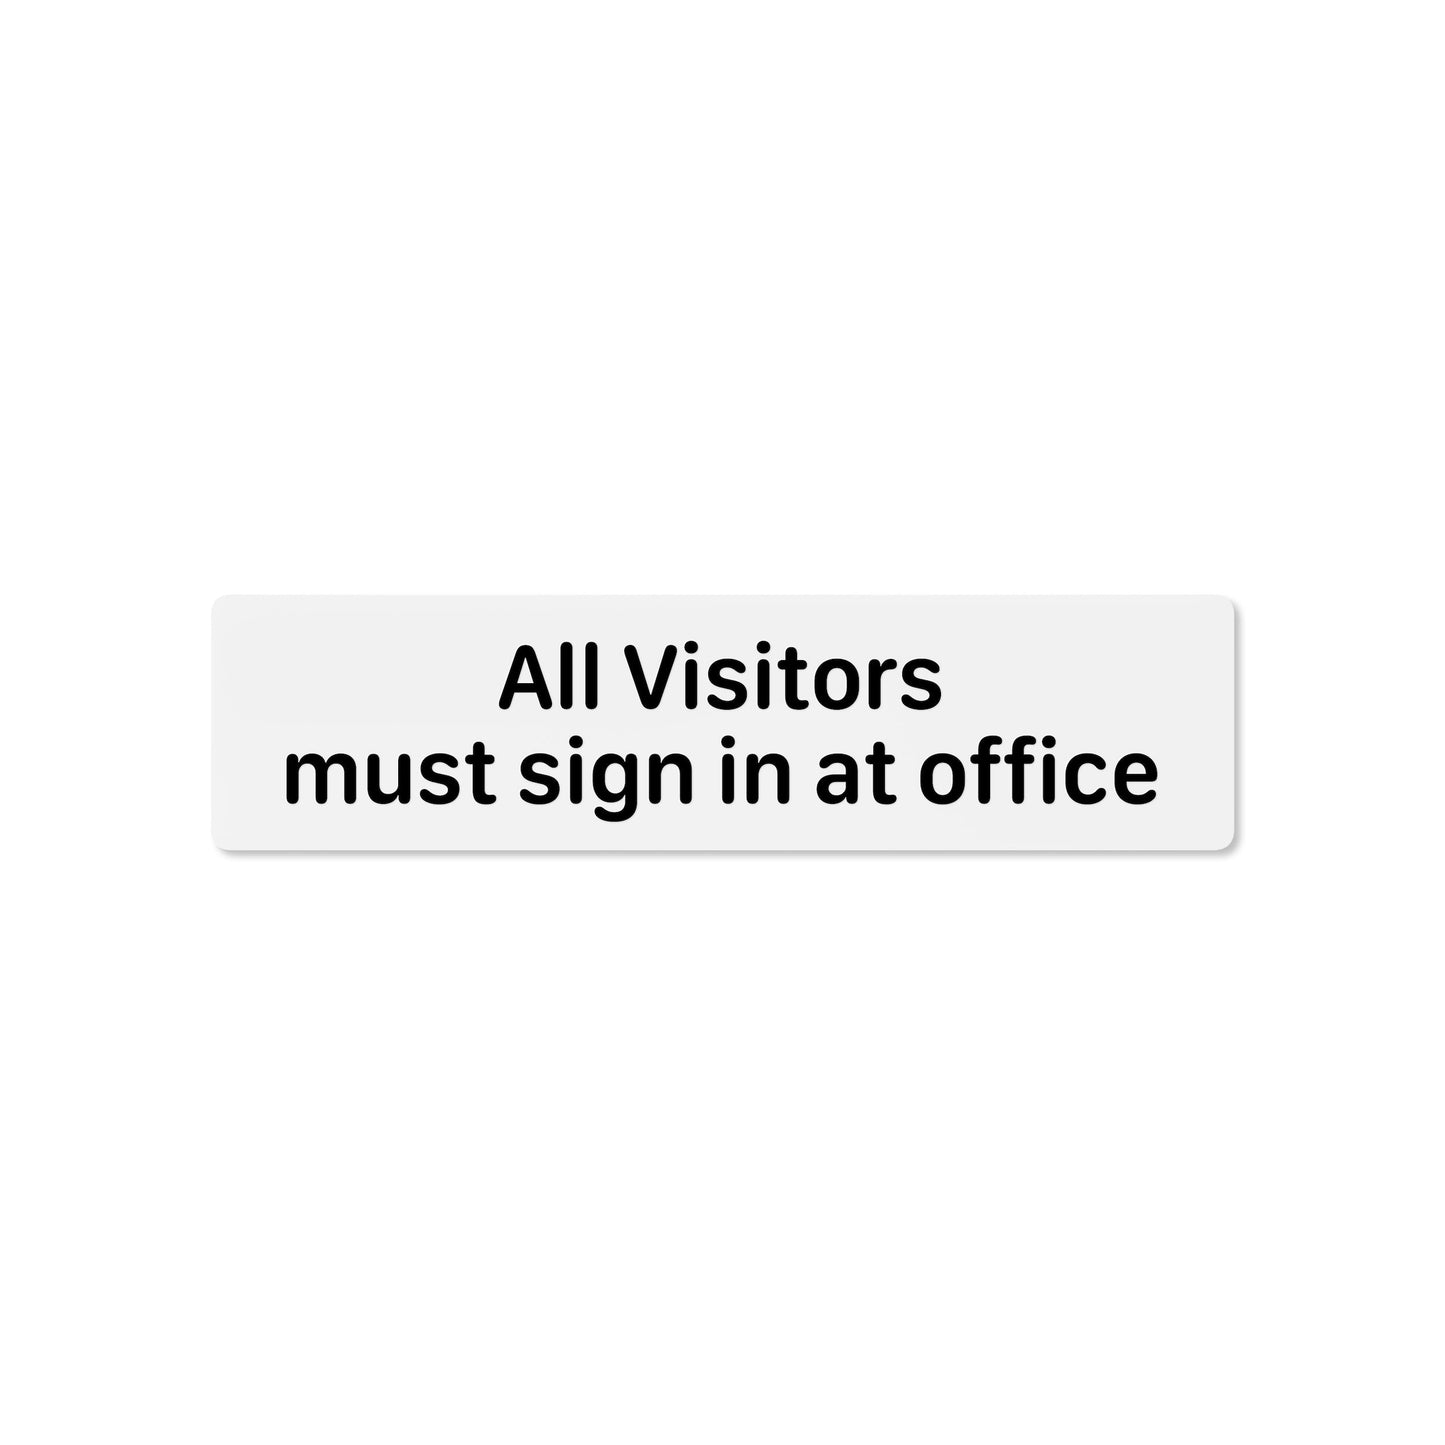 All visitors must sign in at office